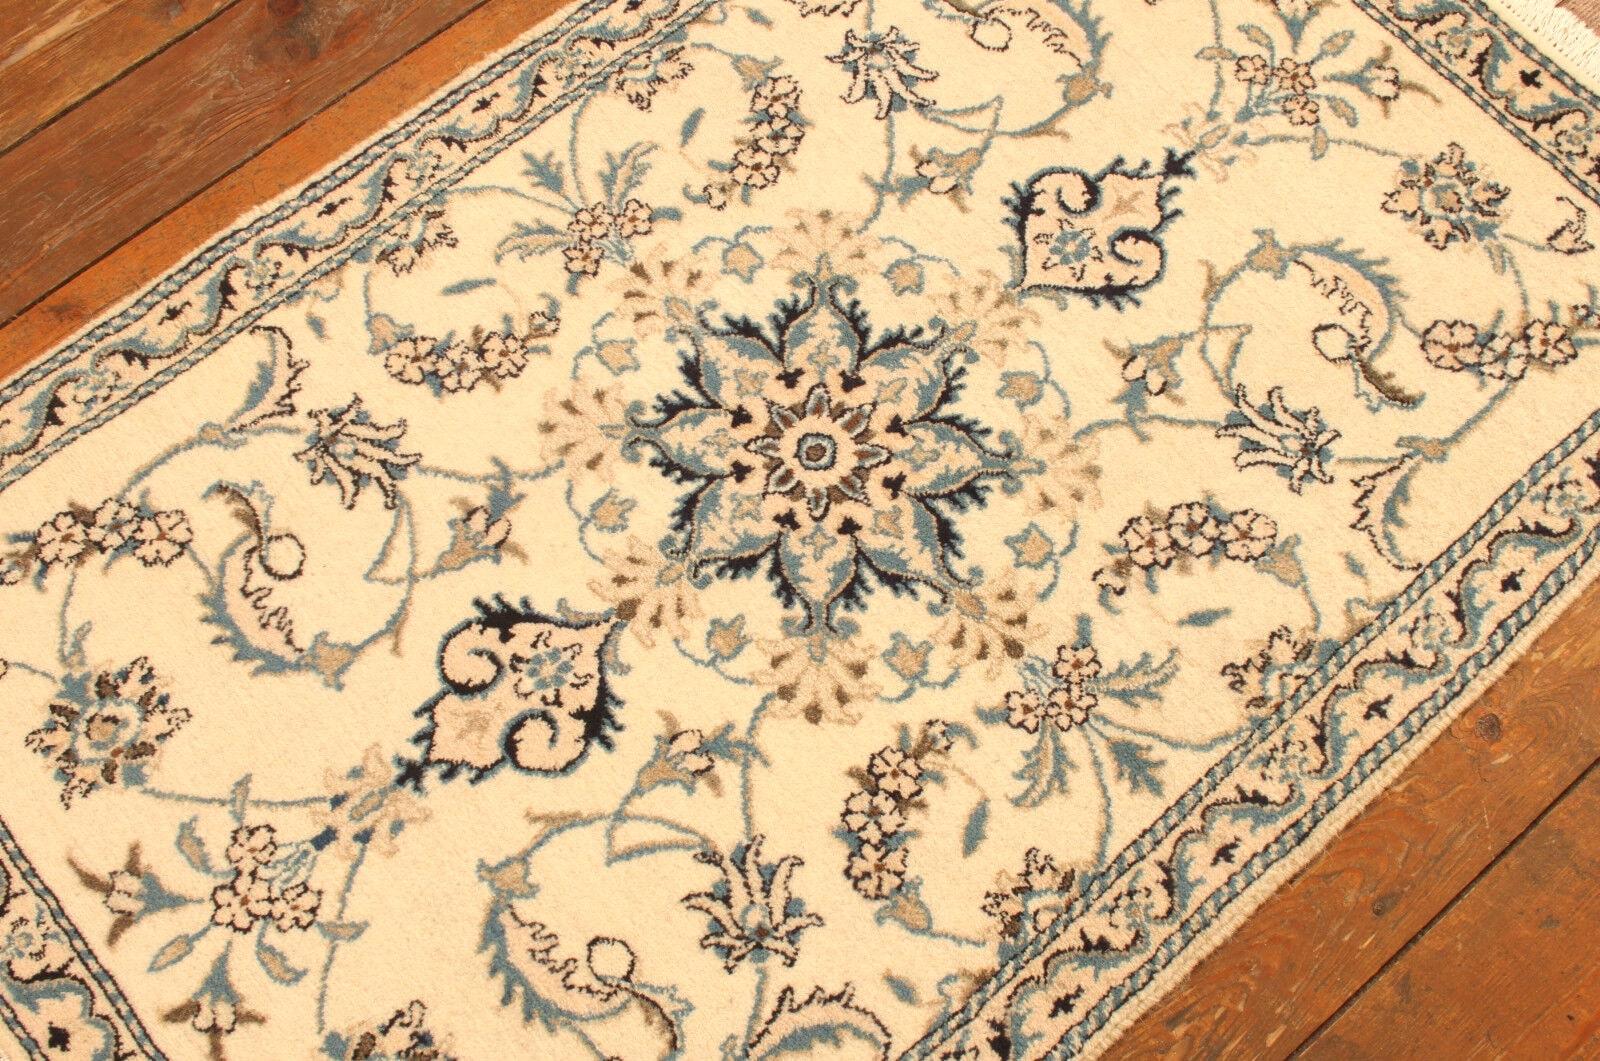 Step back in time with this exquisite Handmade Vintage Persian Style Nain Rug from the 1990s. Crafted with high-quality wool, this rug is a testament to the enduring beauty of Persian artistry. It measures 2.9’ x 4.4’ and is in good condition, ready